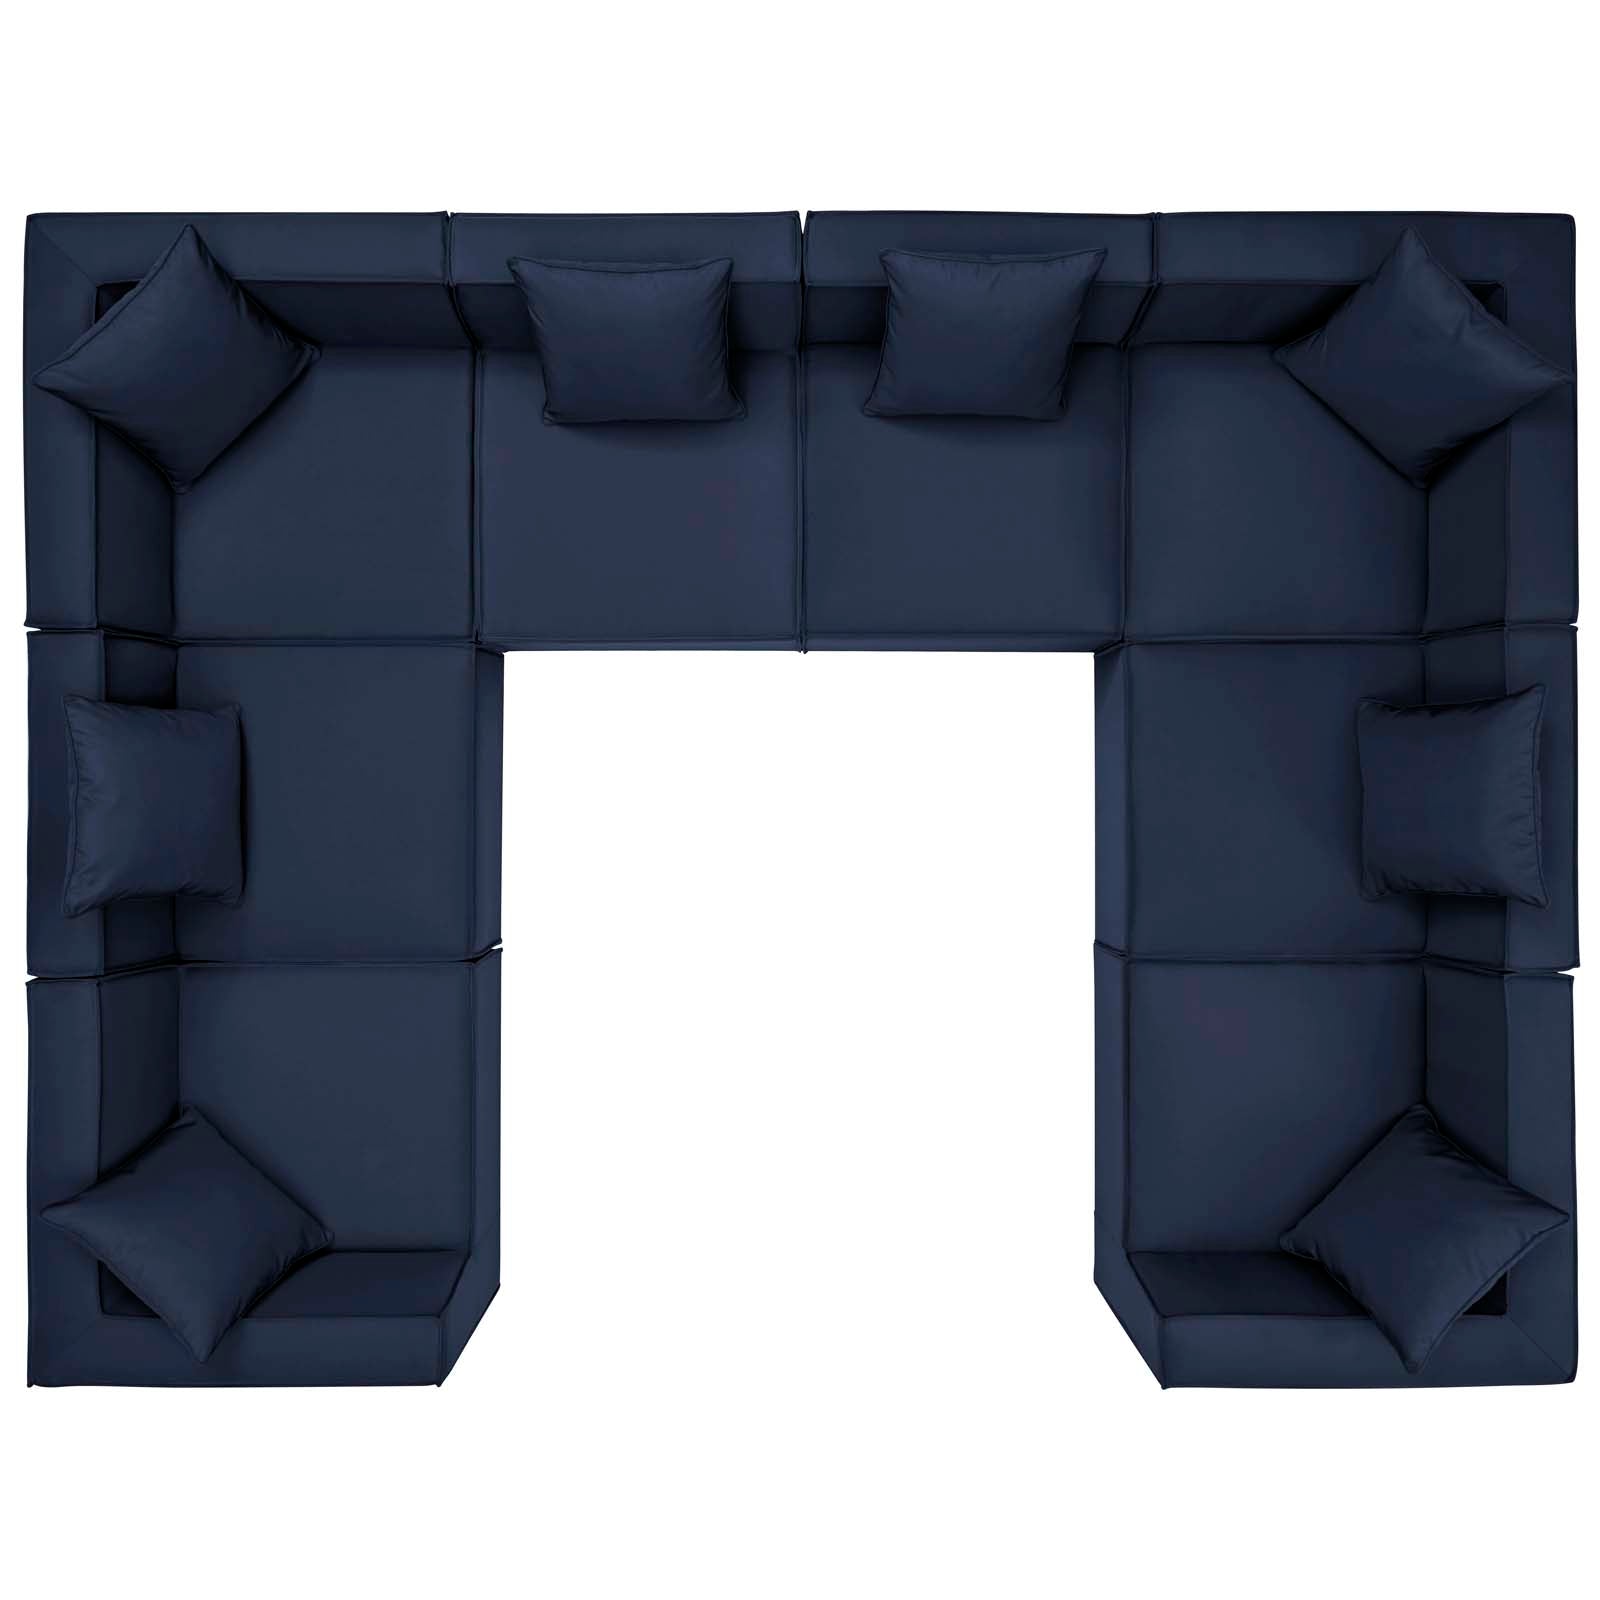 Modway Outdoor Sofas - Saybrook Outdoor Patio Upholstered 8-Piece Sectional Sofa Navy